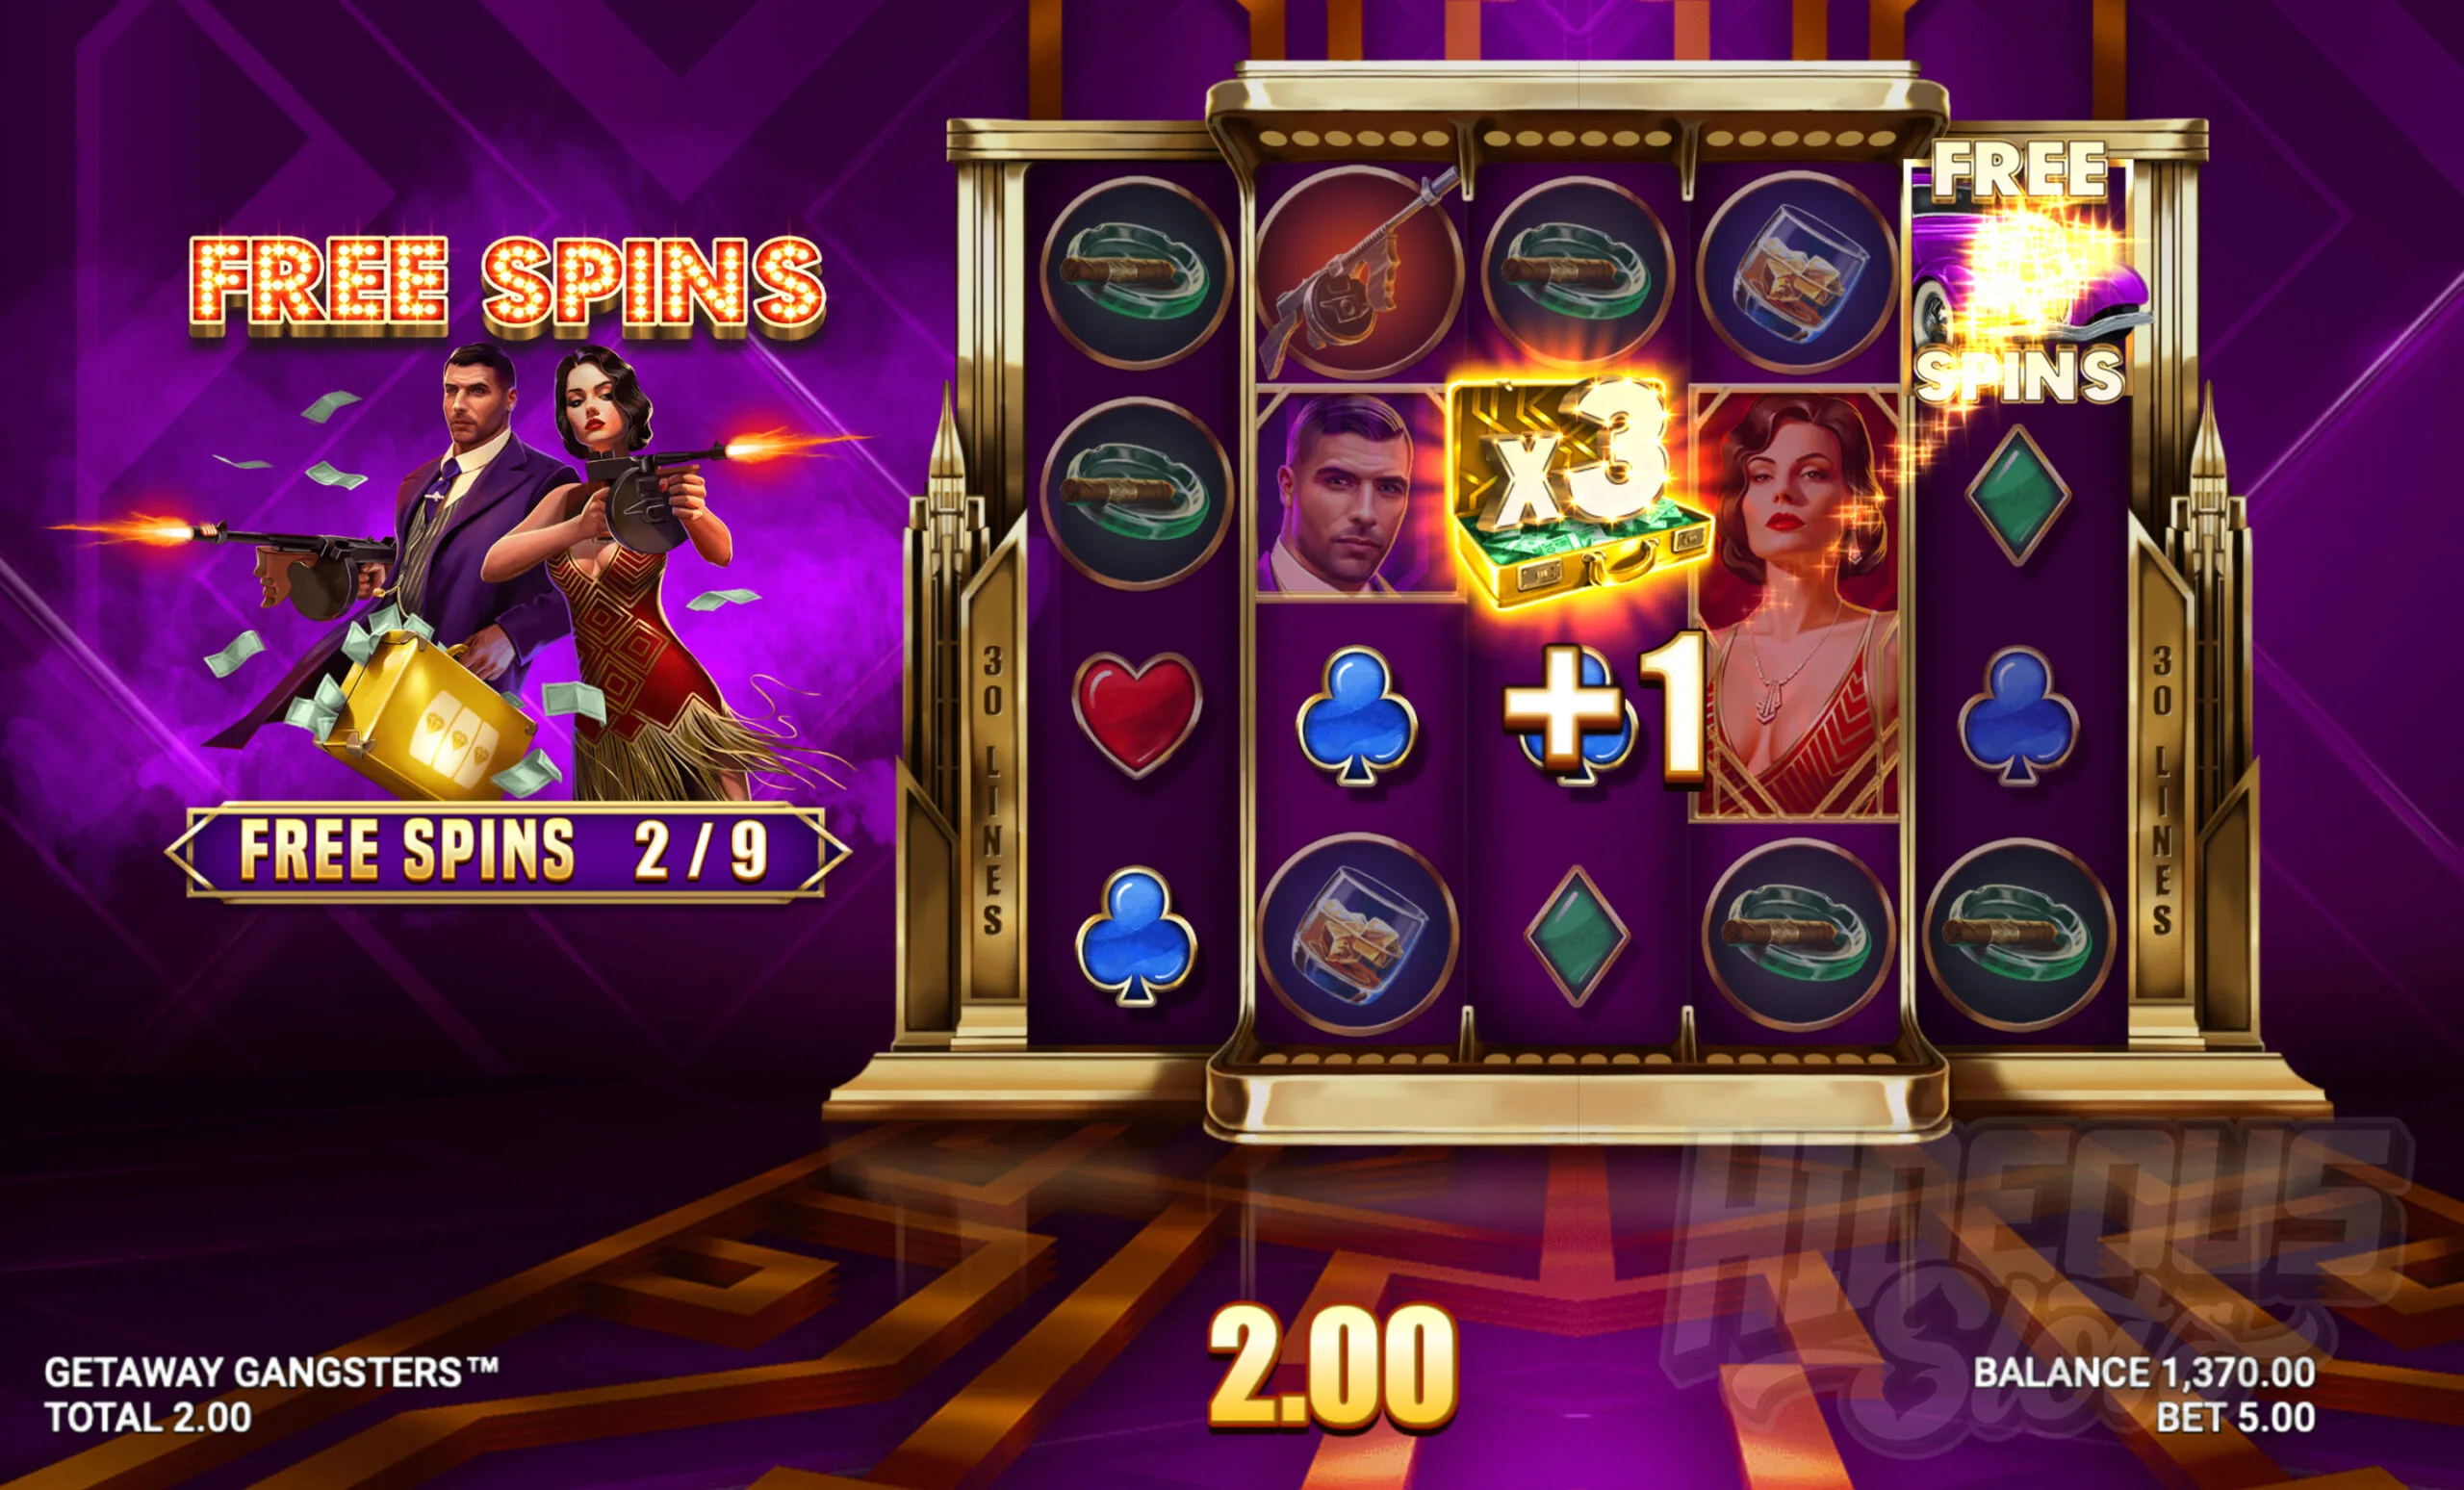 Land Free Spins Symbols During Free Spins to Trigger Additional Spins